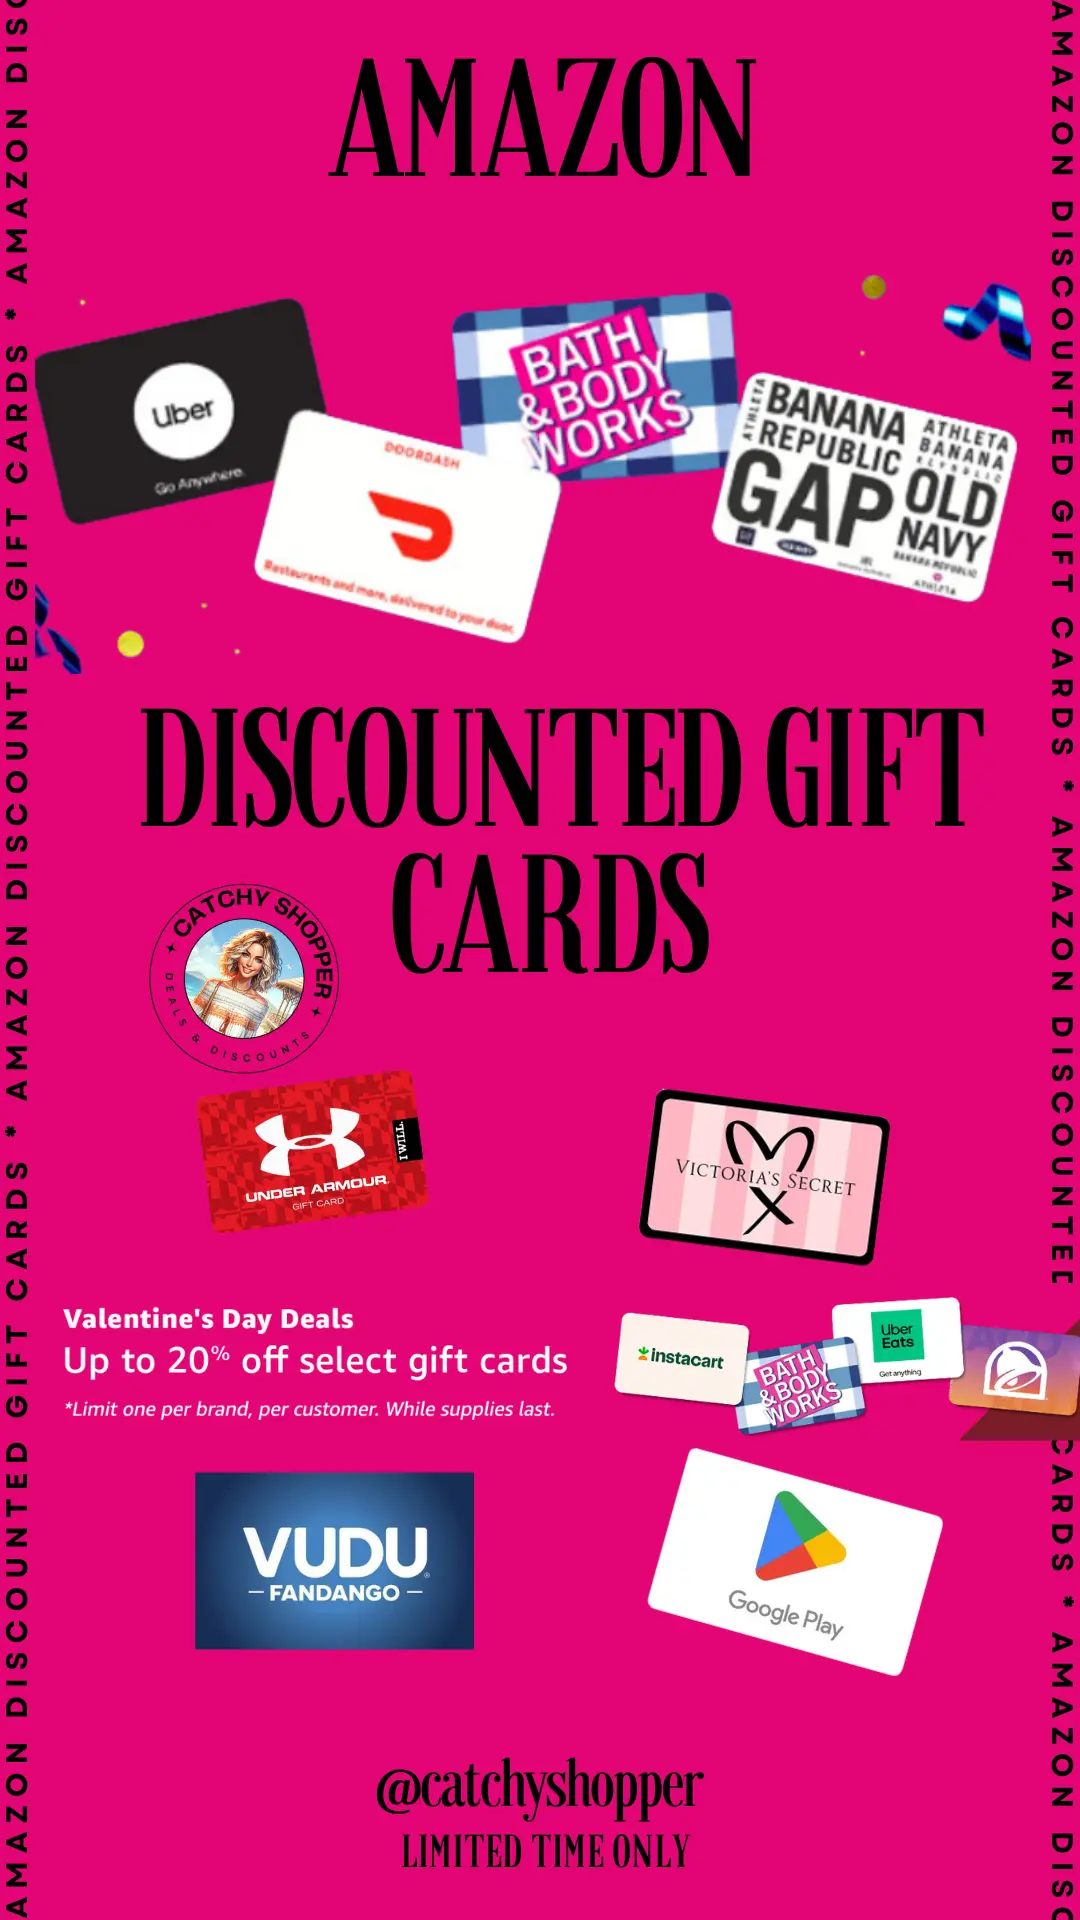 Amazon Discounted Gift Cards